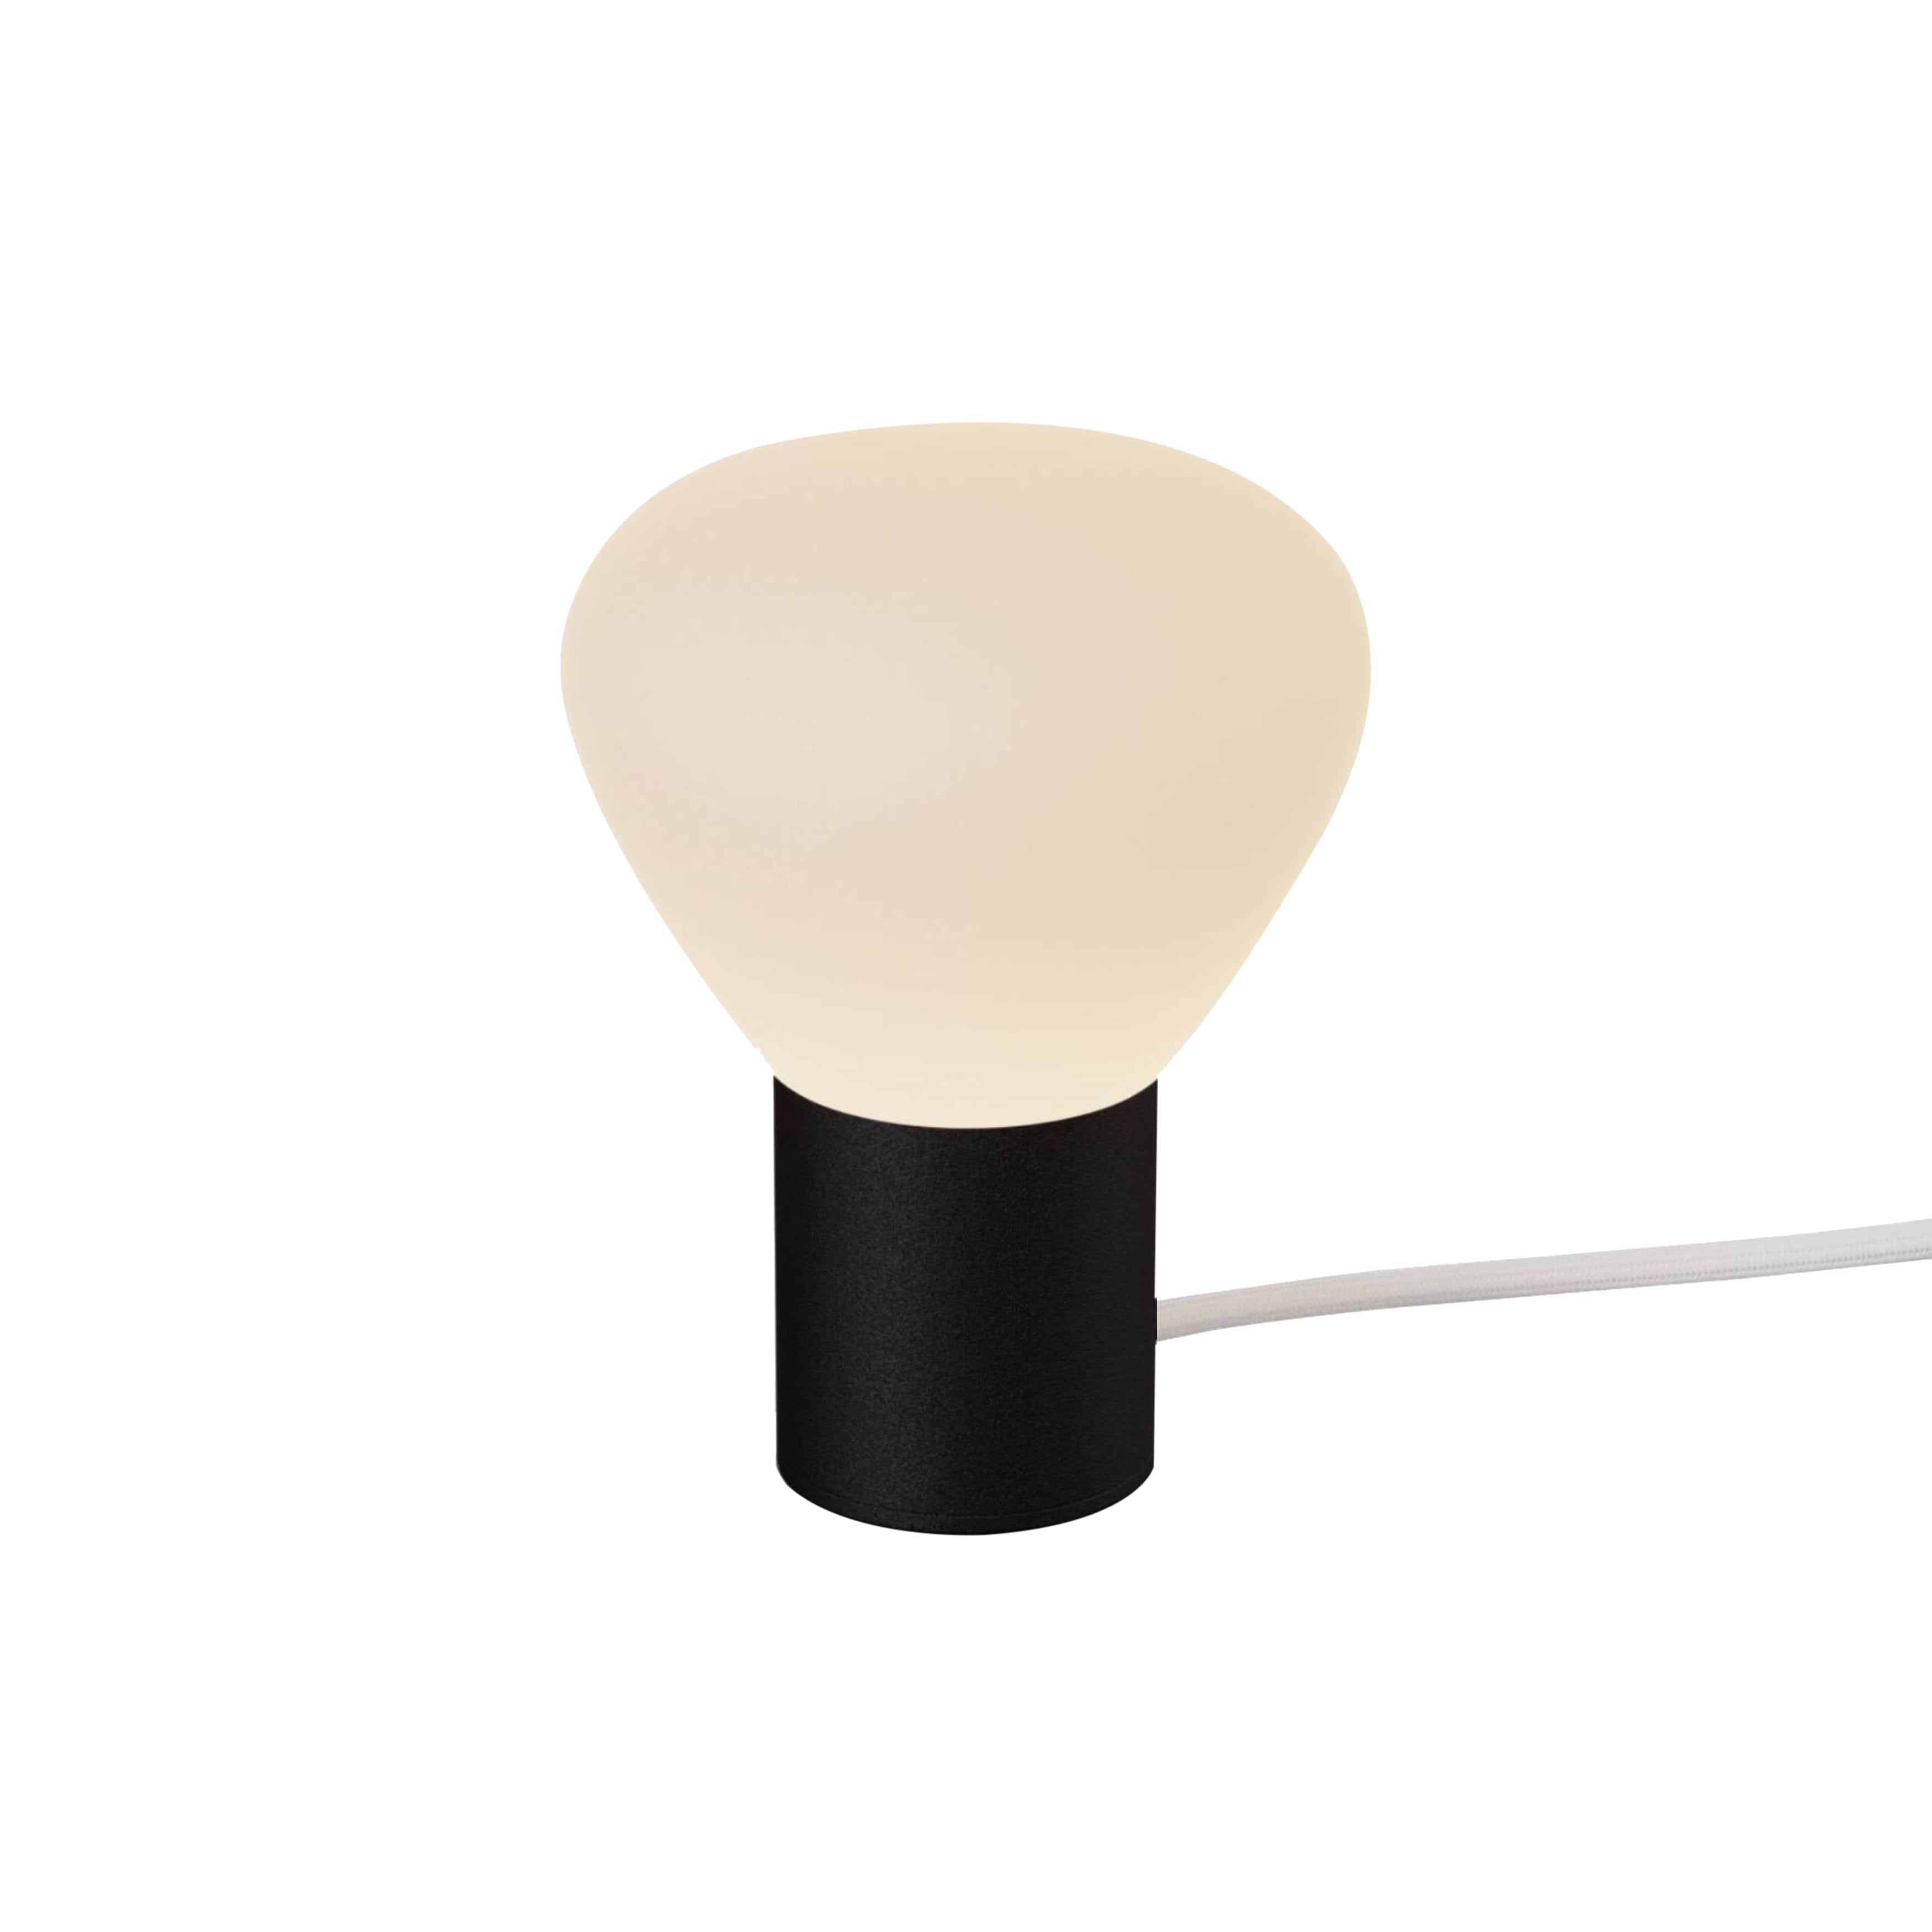 Parc 01 Table Lamp: Handswitch + Black + White